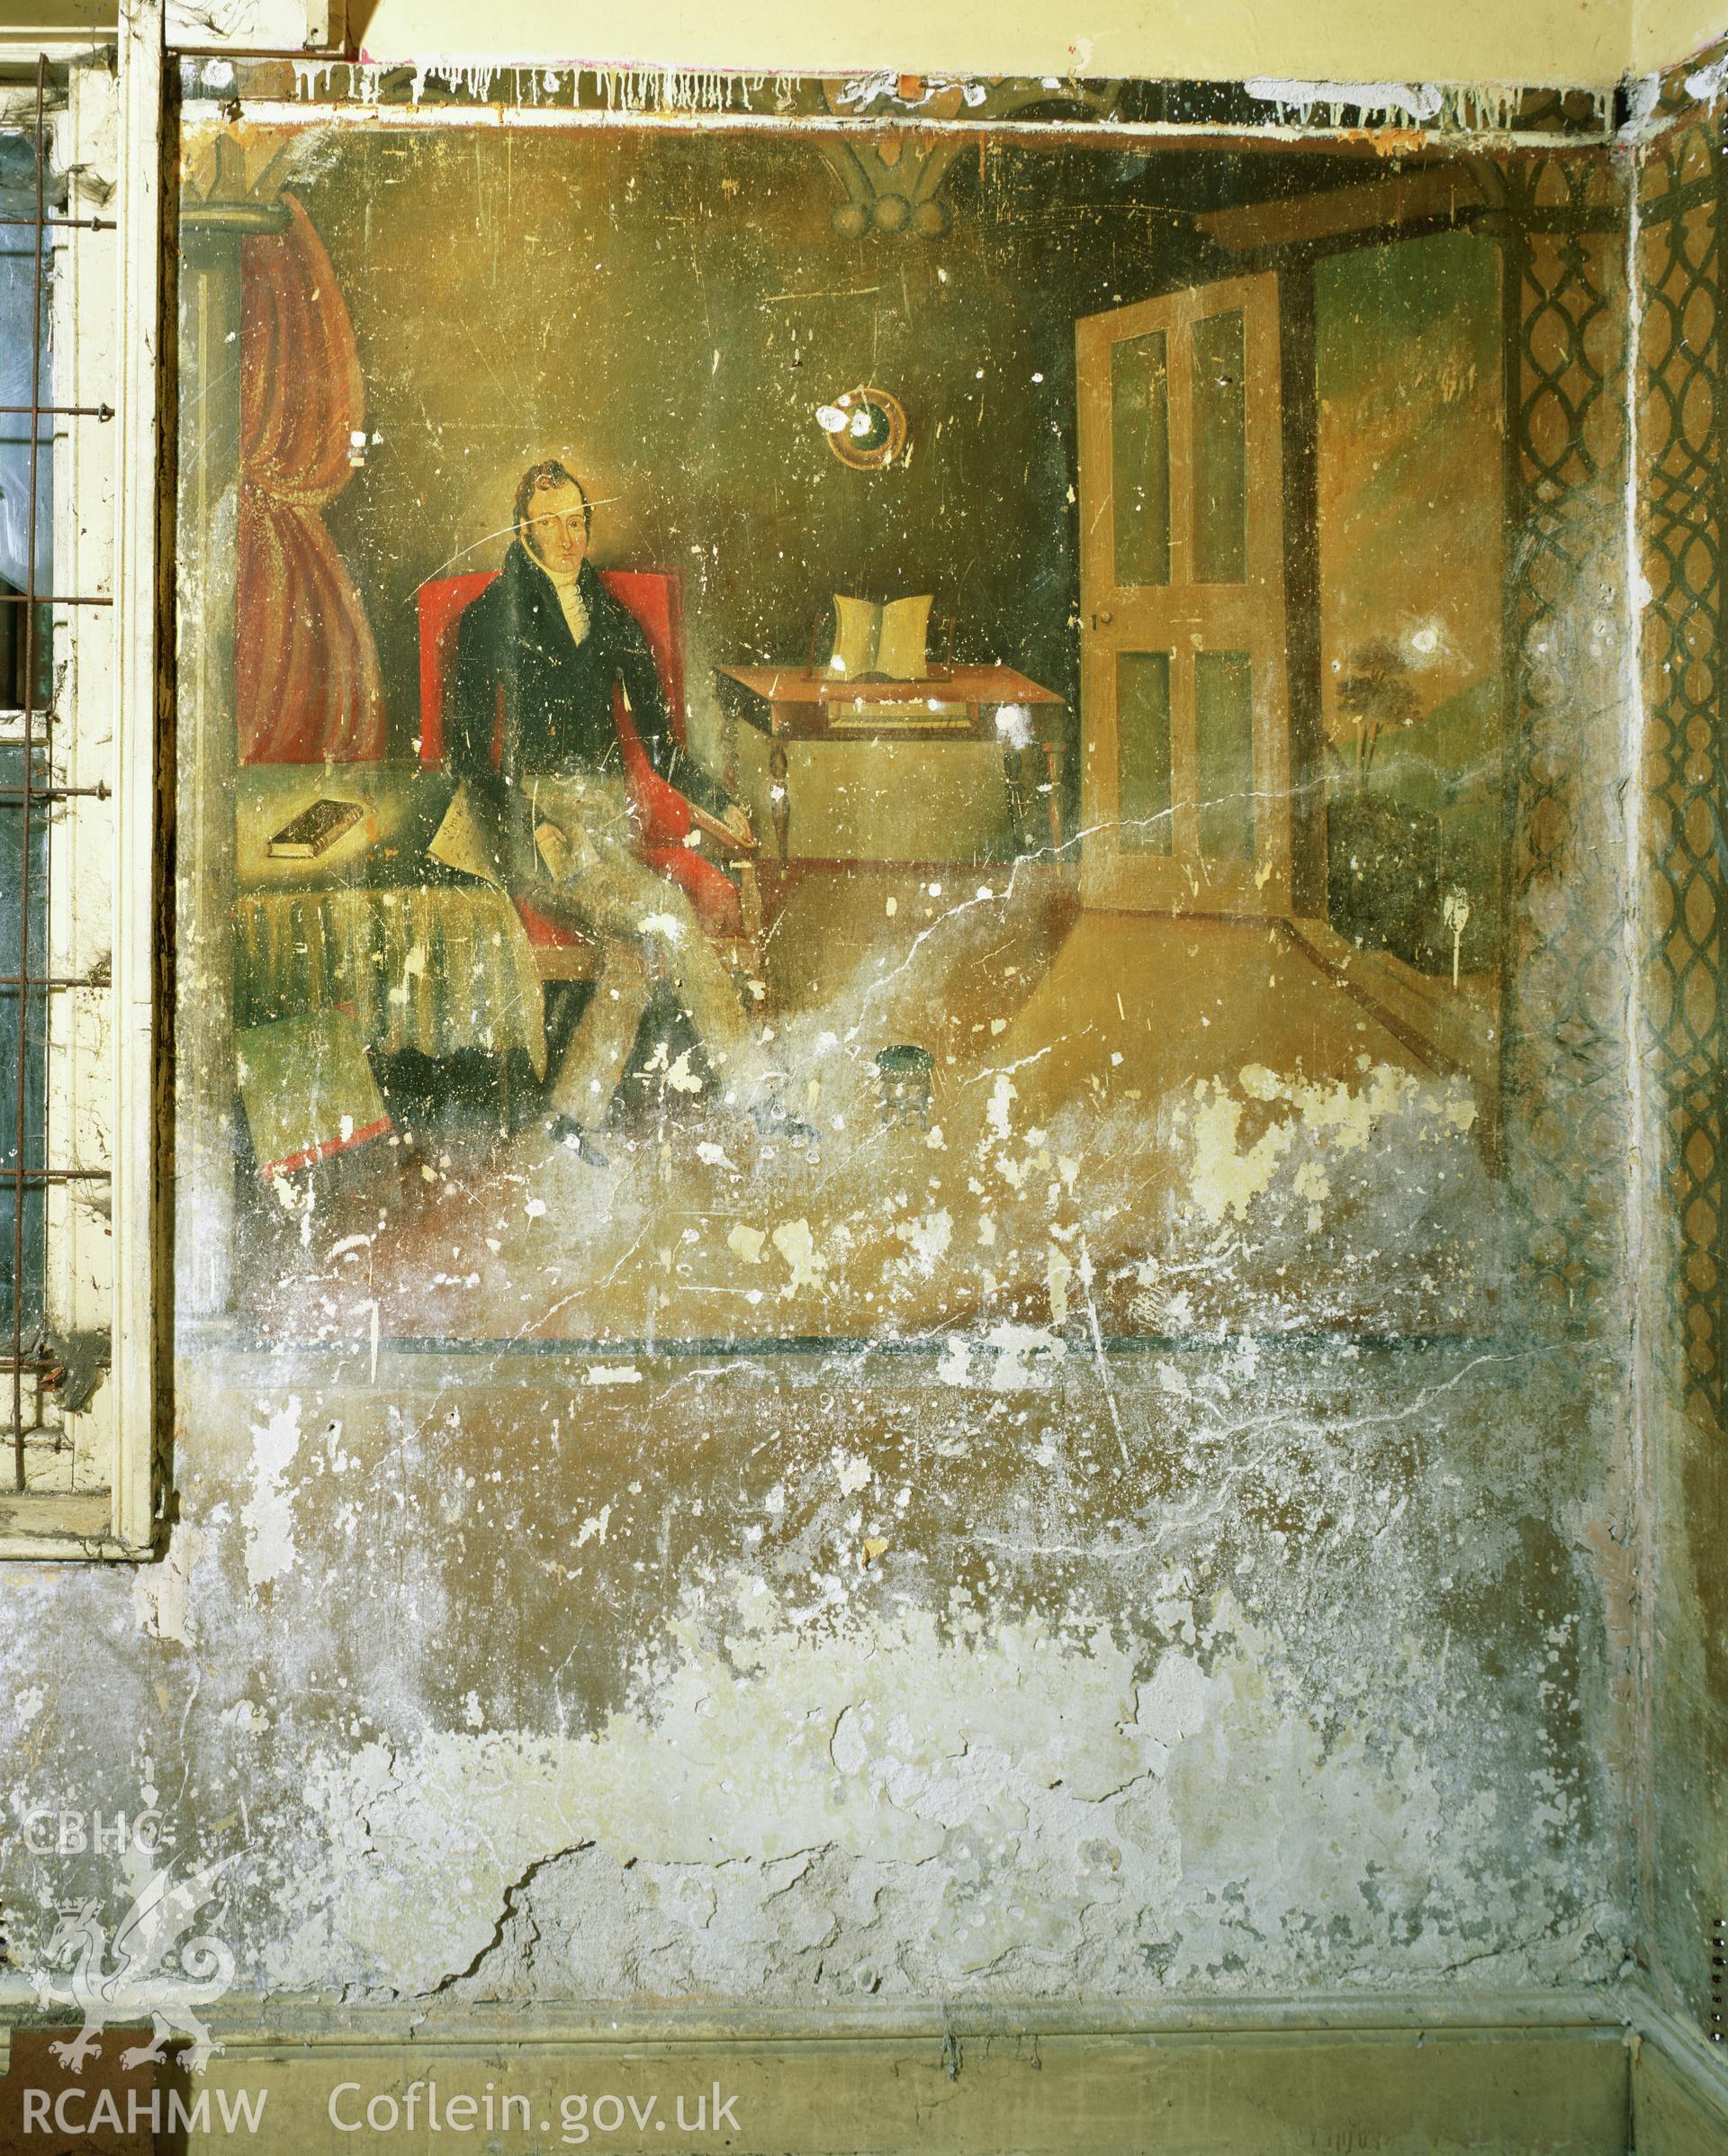 RCAHMW colour transparency showing the gentleman of letters painting at Elwy Bank, St Asaph, photographed by Iain Wright, November 2003.